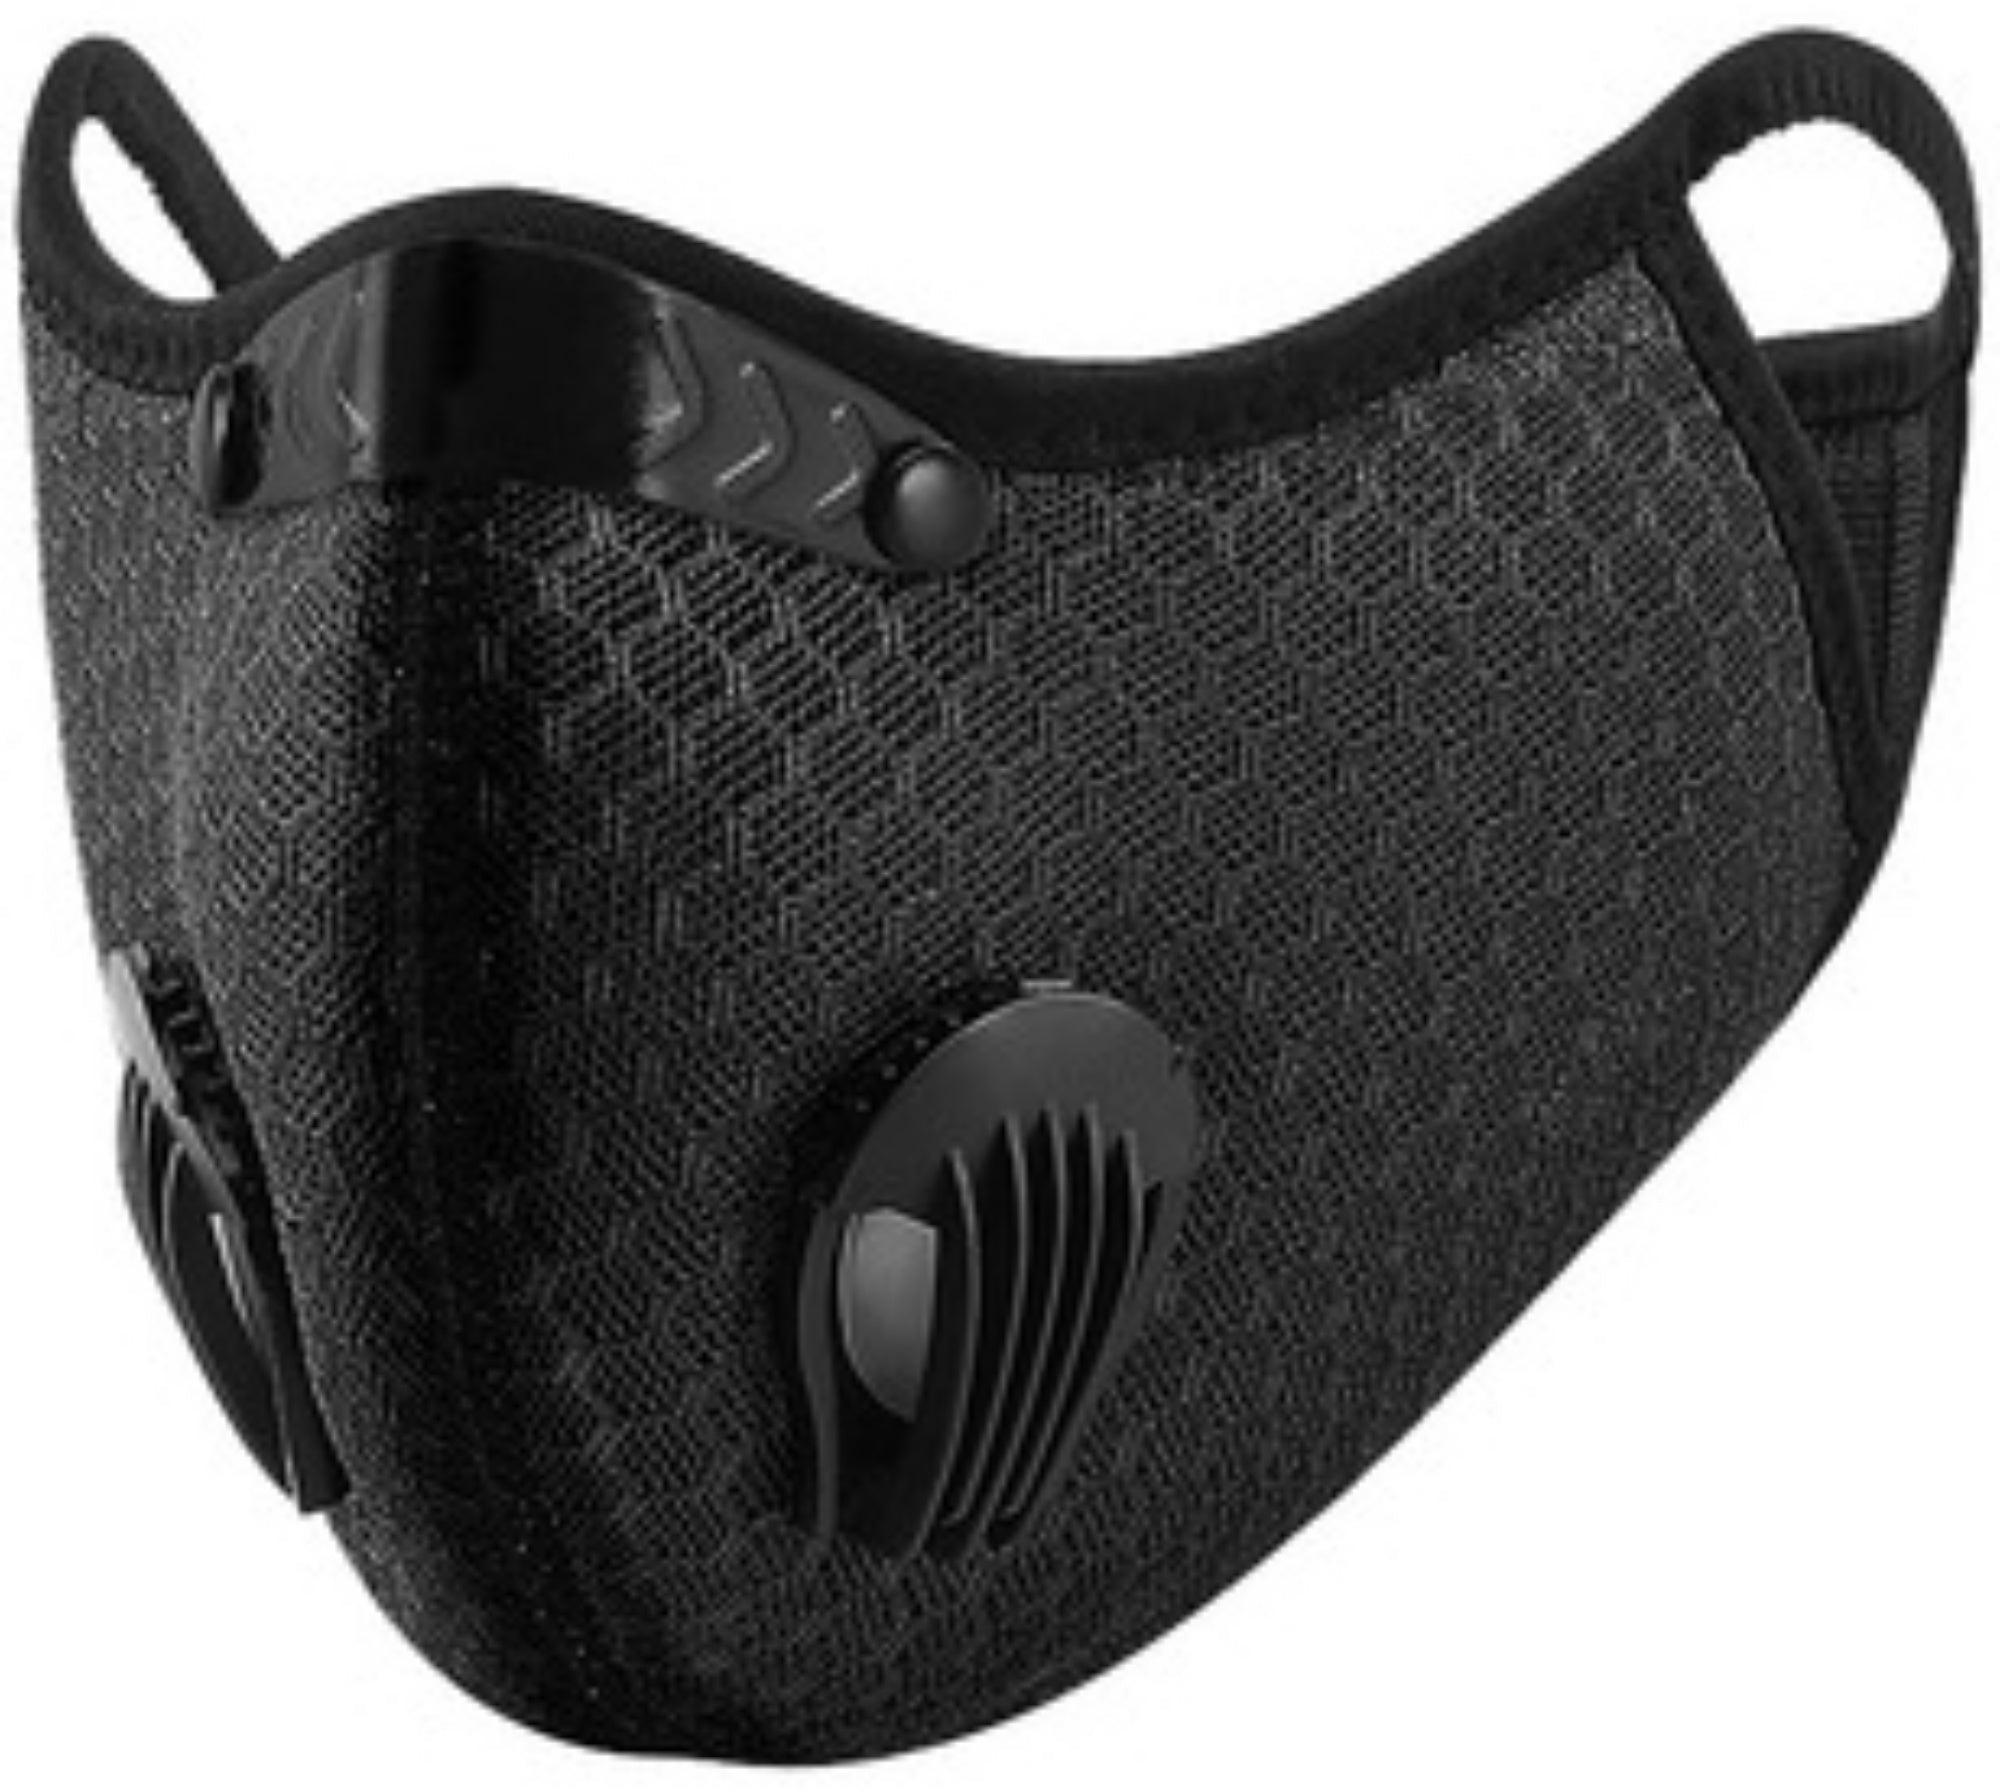 Cycling Mesh Outdoor Sports Face Mask Double Valves with (1) Free 5-layer Filter